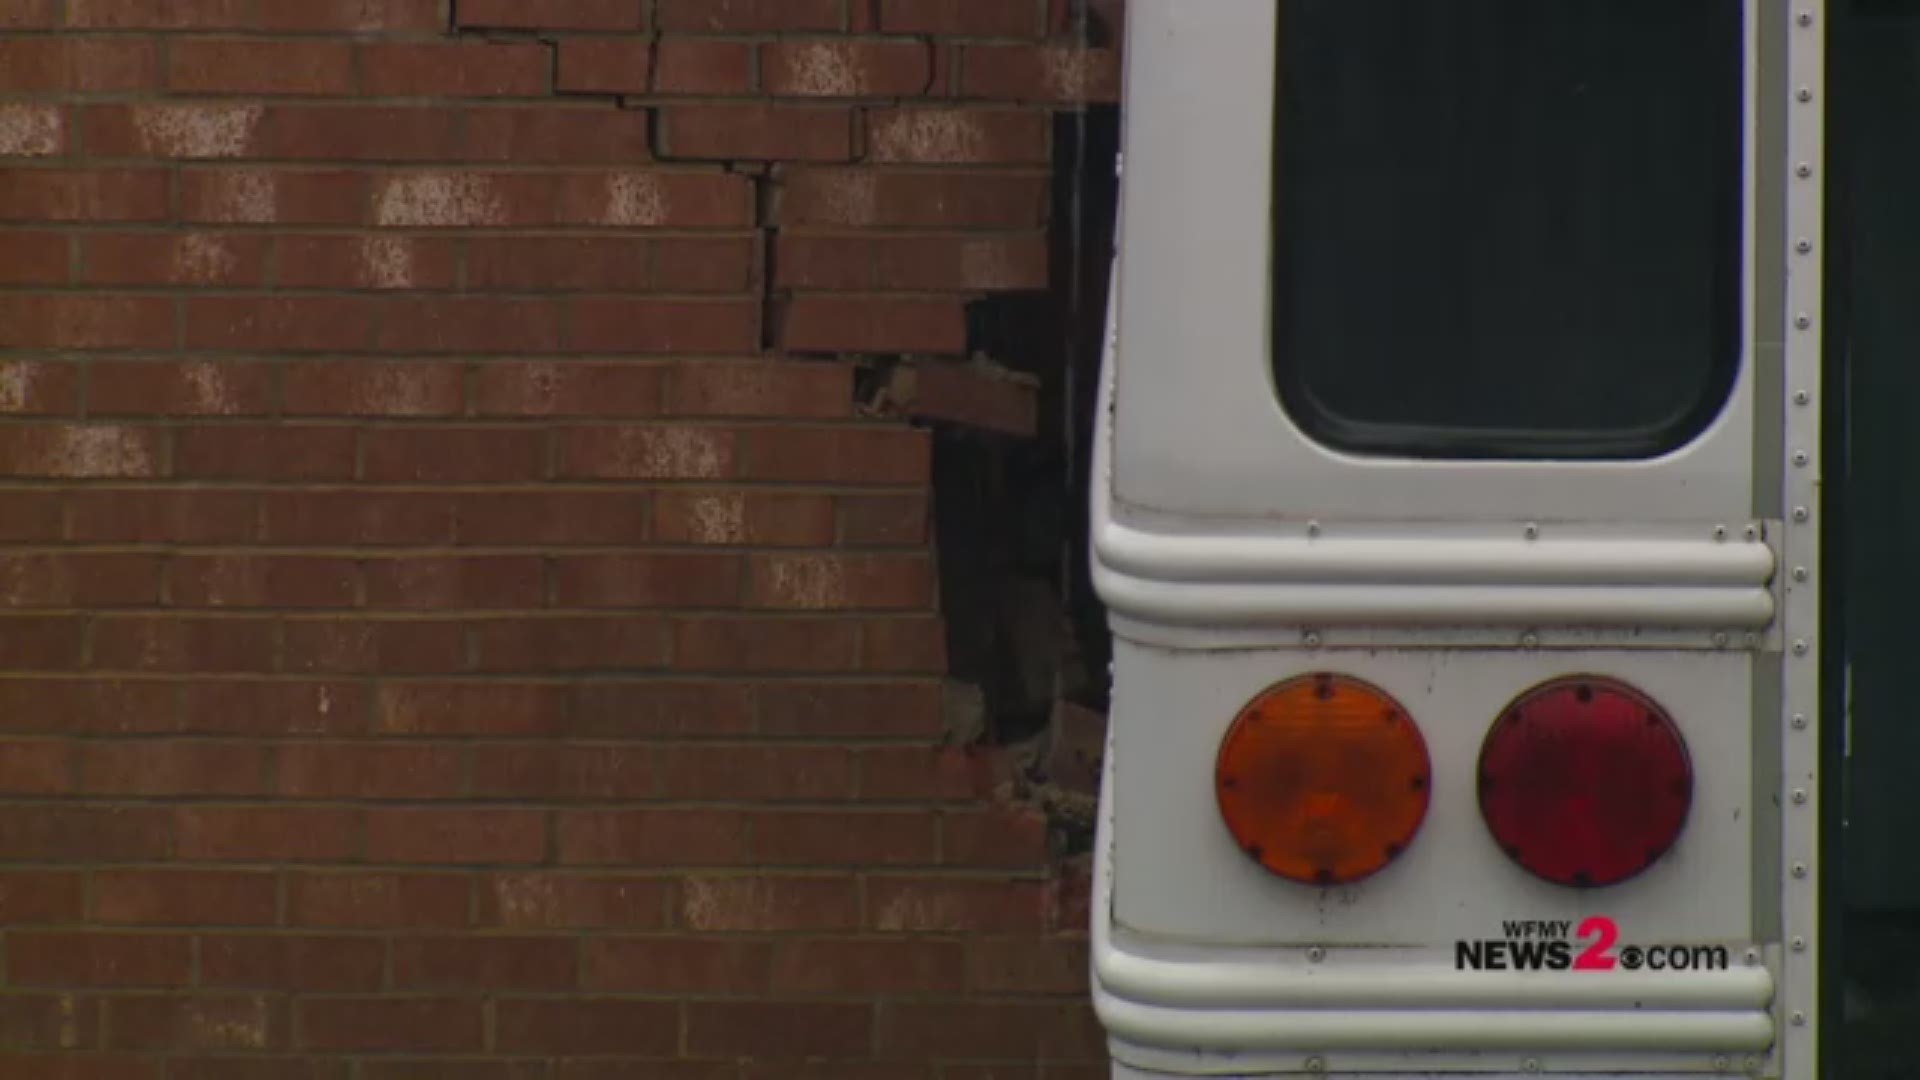 A NC State Highway Patrol Trooper says the driver of a La Petite Academy bus hit a building while trying to avoid hitting a car that pulled in front of the bus. There were two children on the bus and they were not injured. The driver is okay as well.